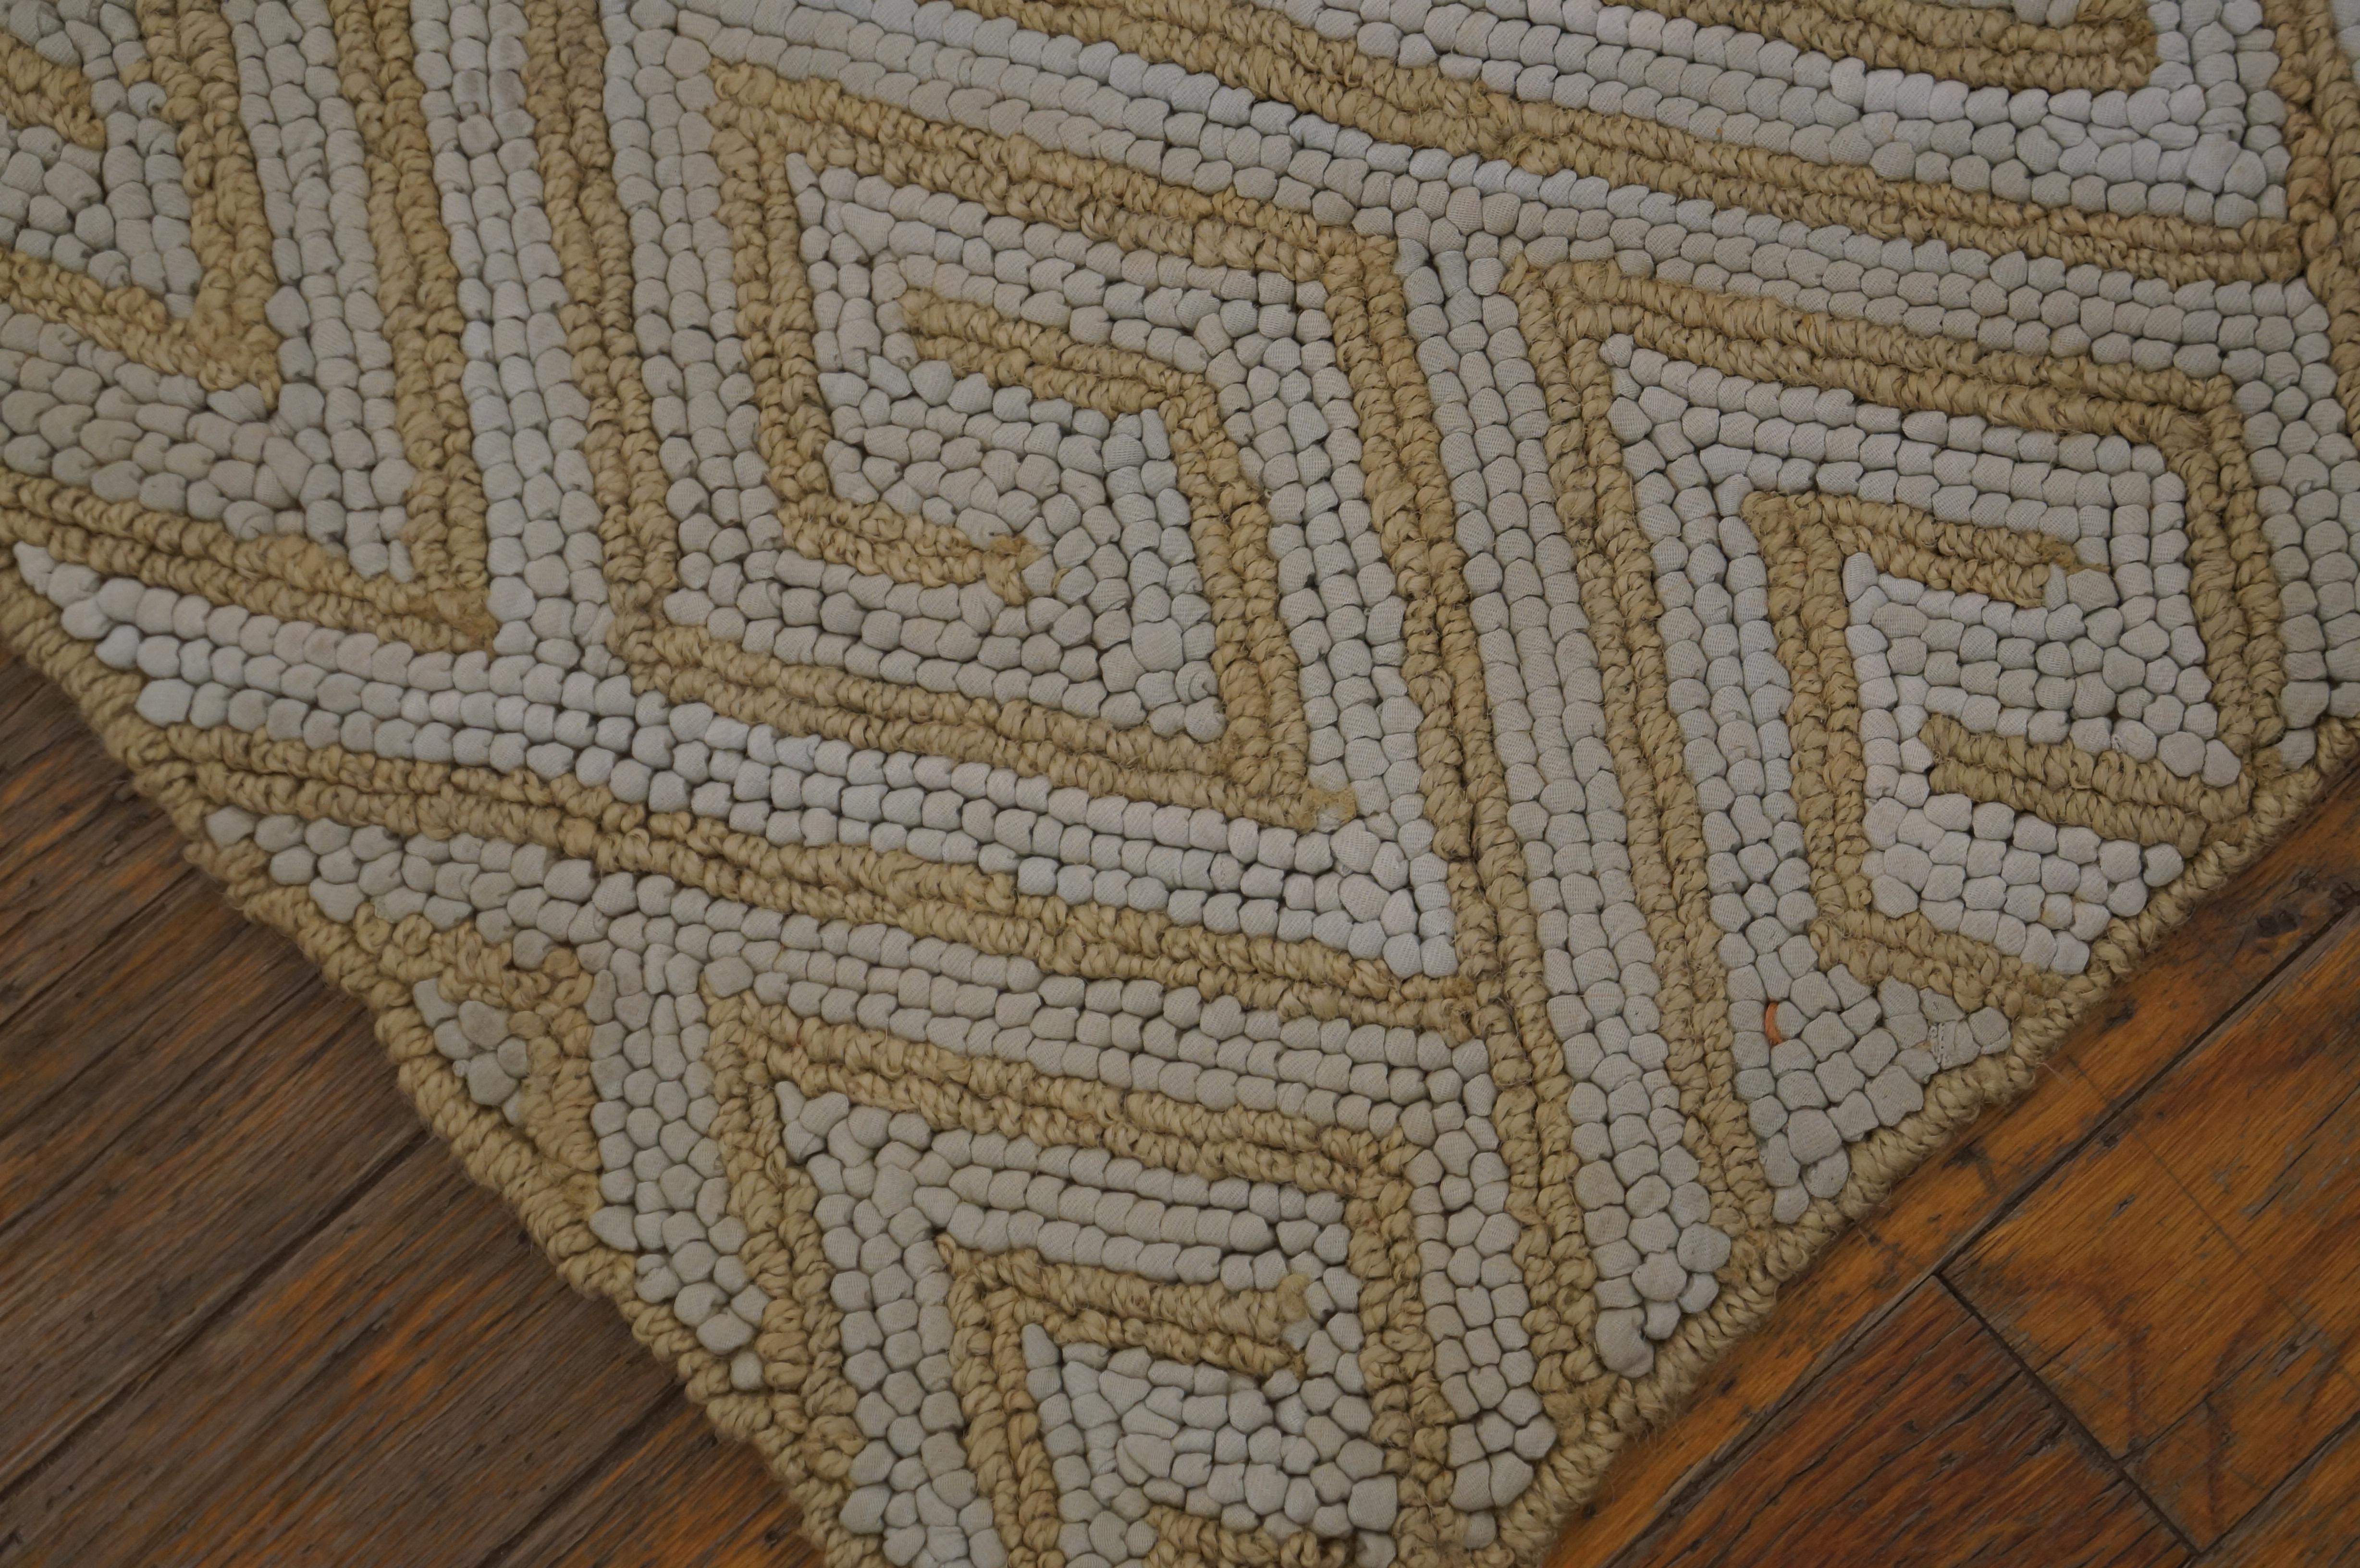 cotton hooked rugs